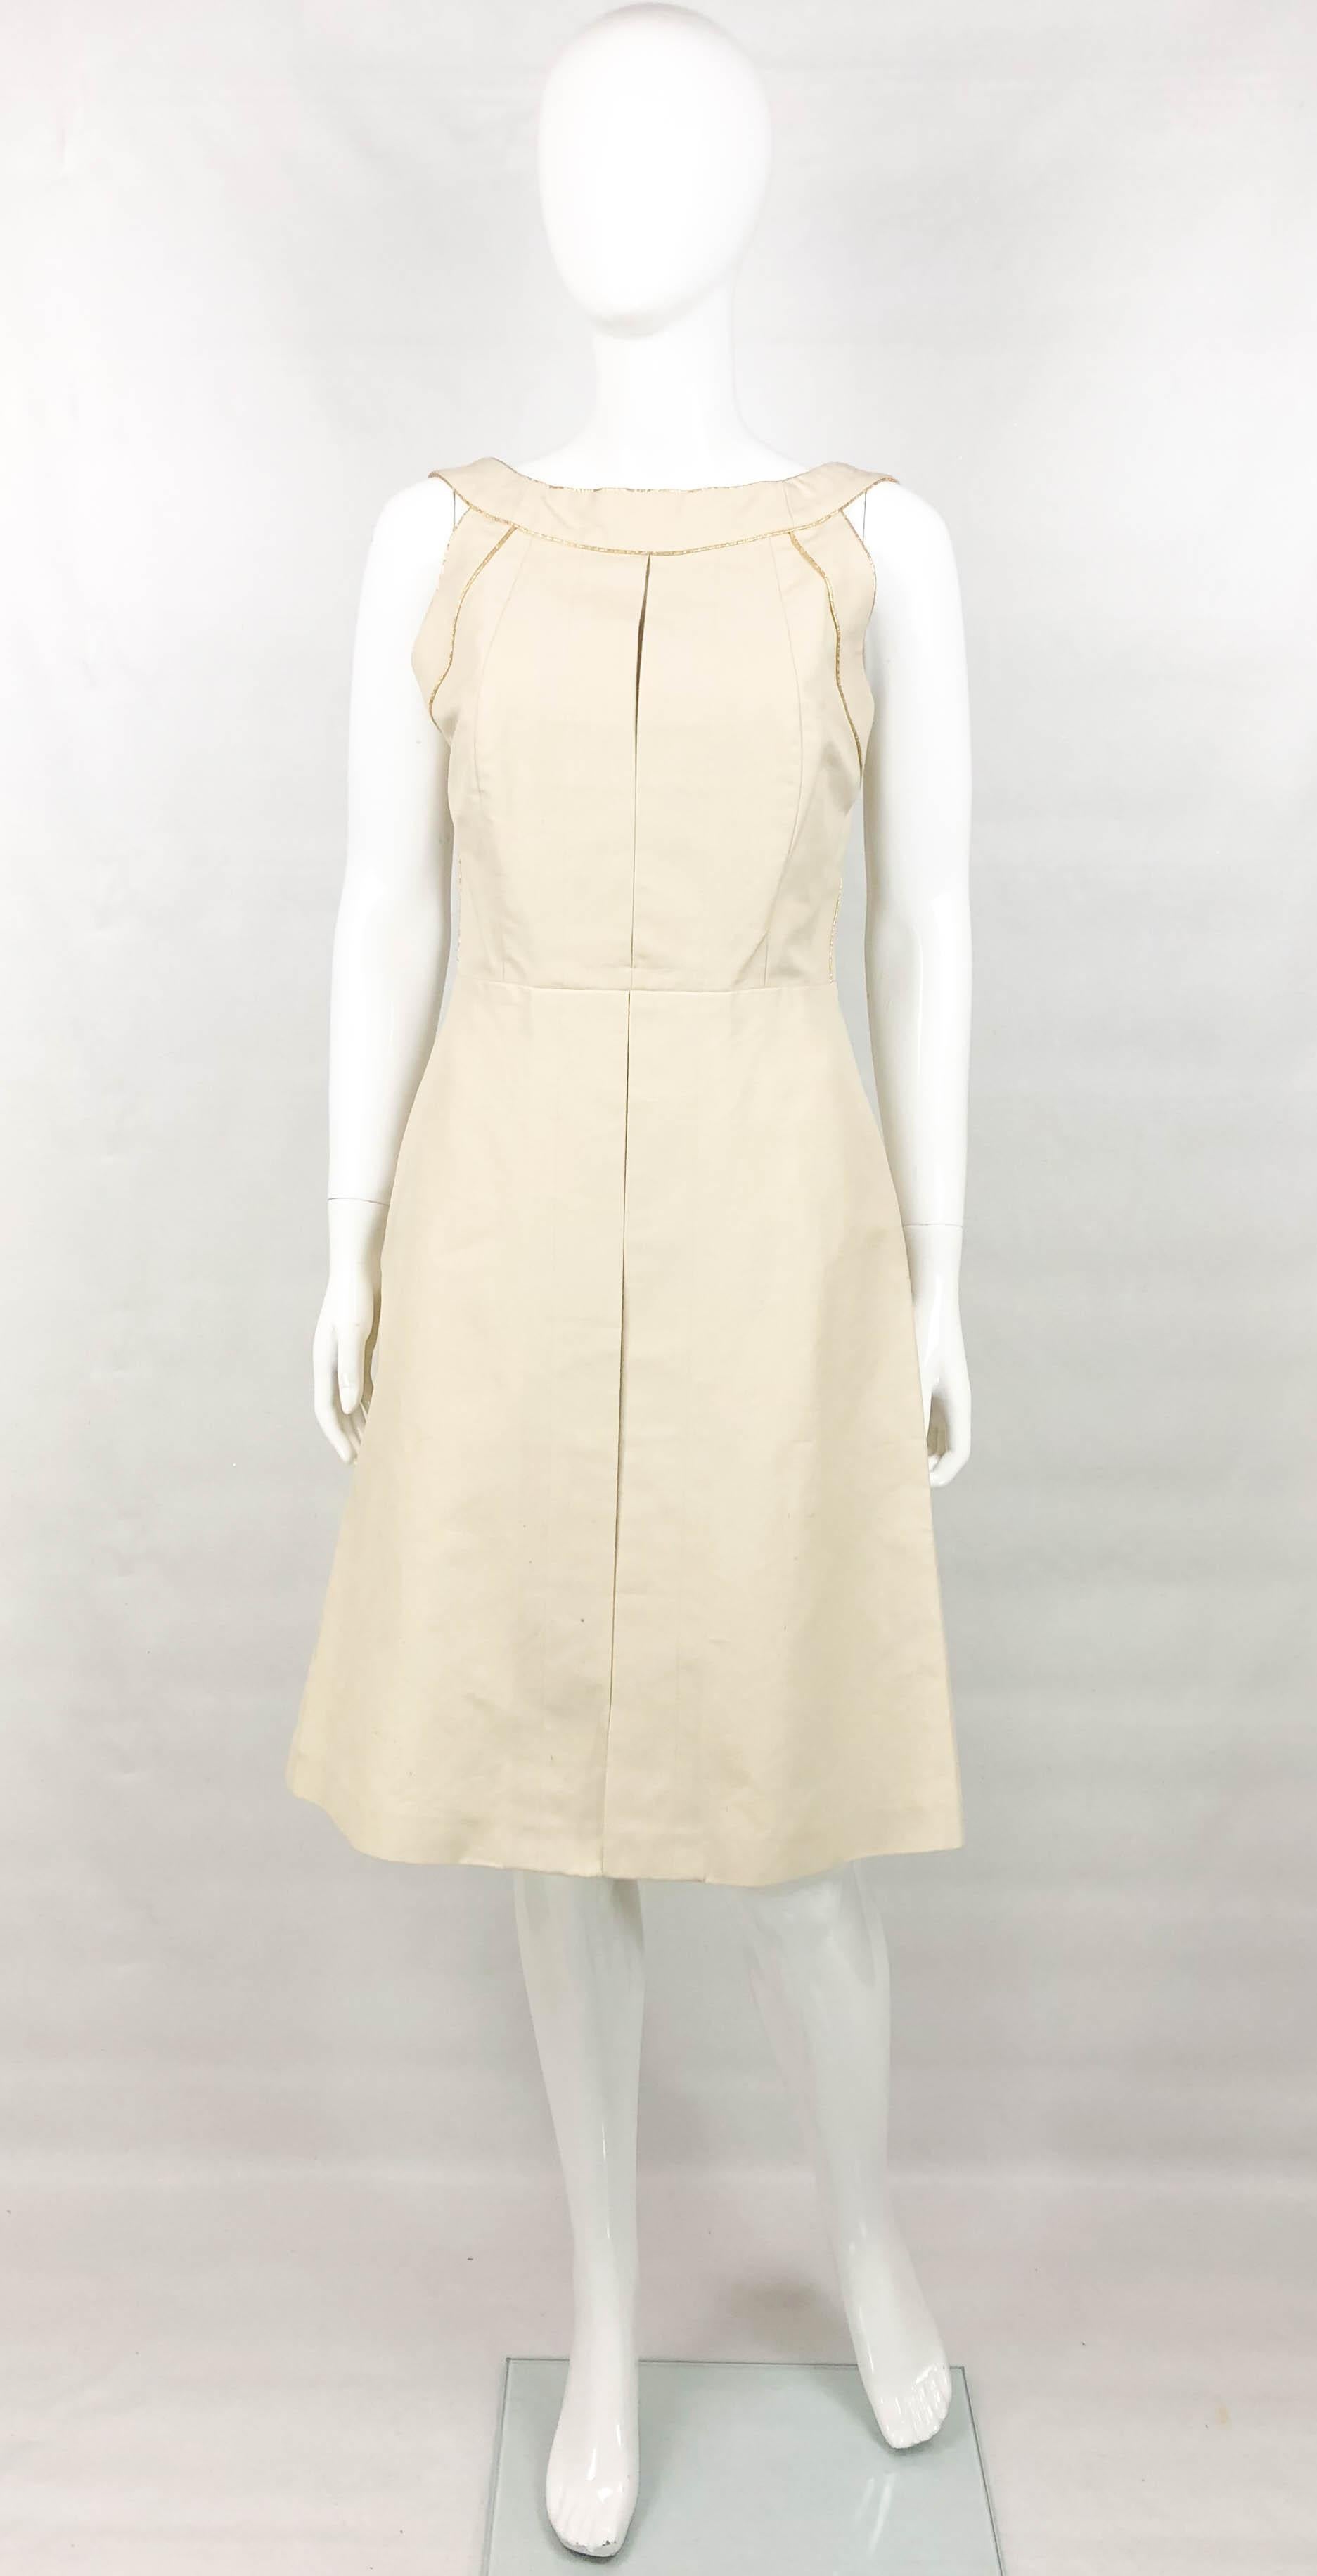 Yves Saint Laurent Cream Cotton Dress. This stylish dress by Yves Saint Laurent was created for the 2011 Spring / Summer Collection. Made in cream cotton, this sleeveless dress hovers at knee height and has accentuated waist. The top half of the